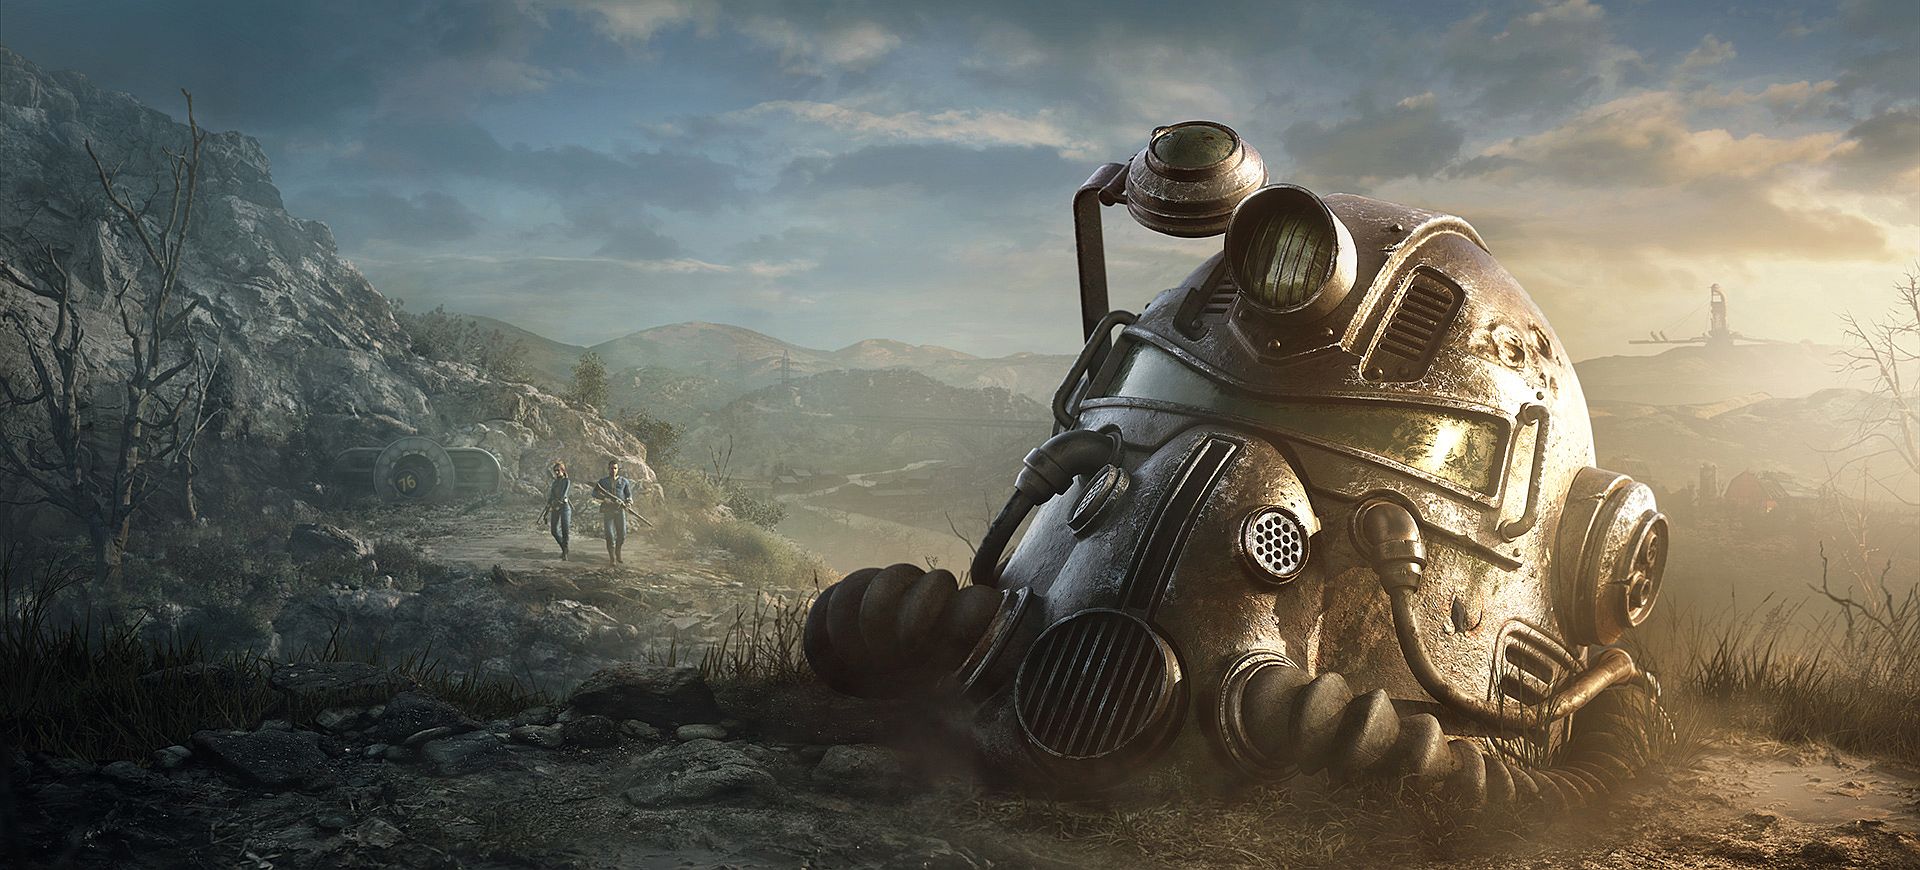 Image for Fallout 76 Steam, map, mods, gameplay, weapons, mothman - everything we know